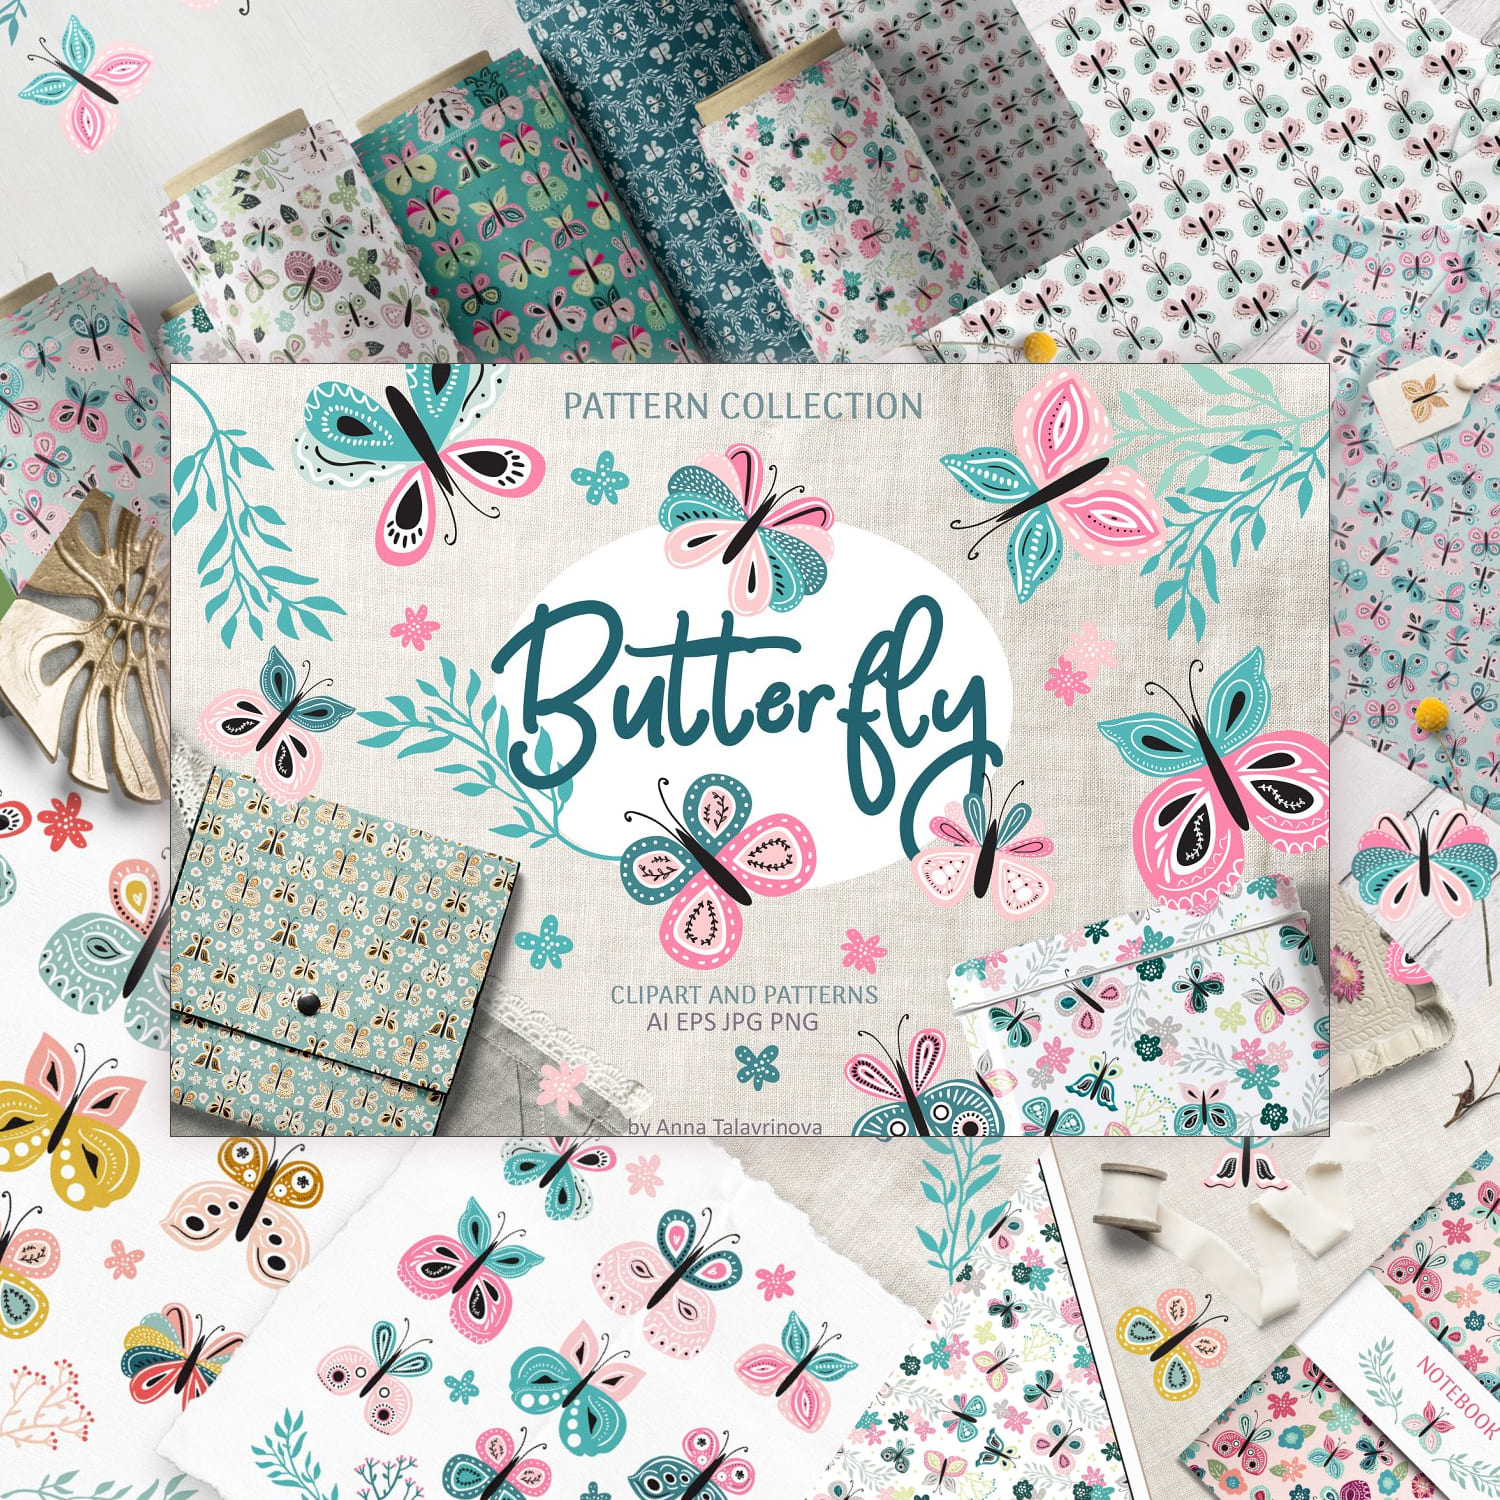 Butterflies patterns collection cover.